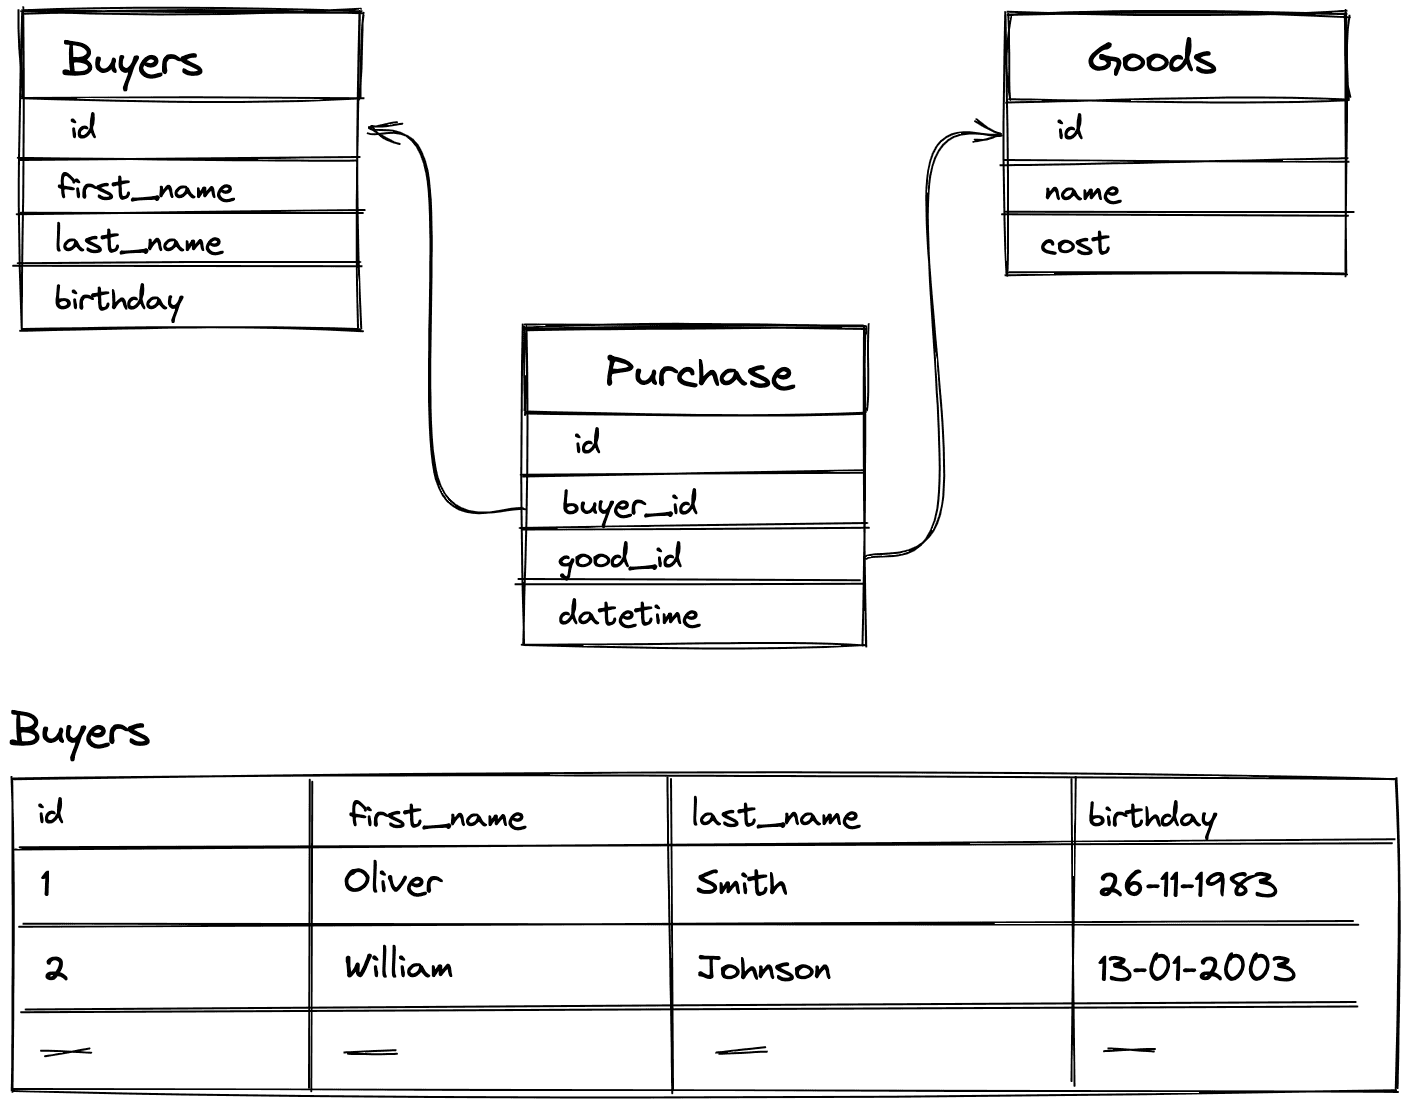 Example of a relational database